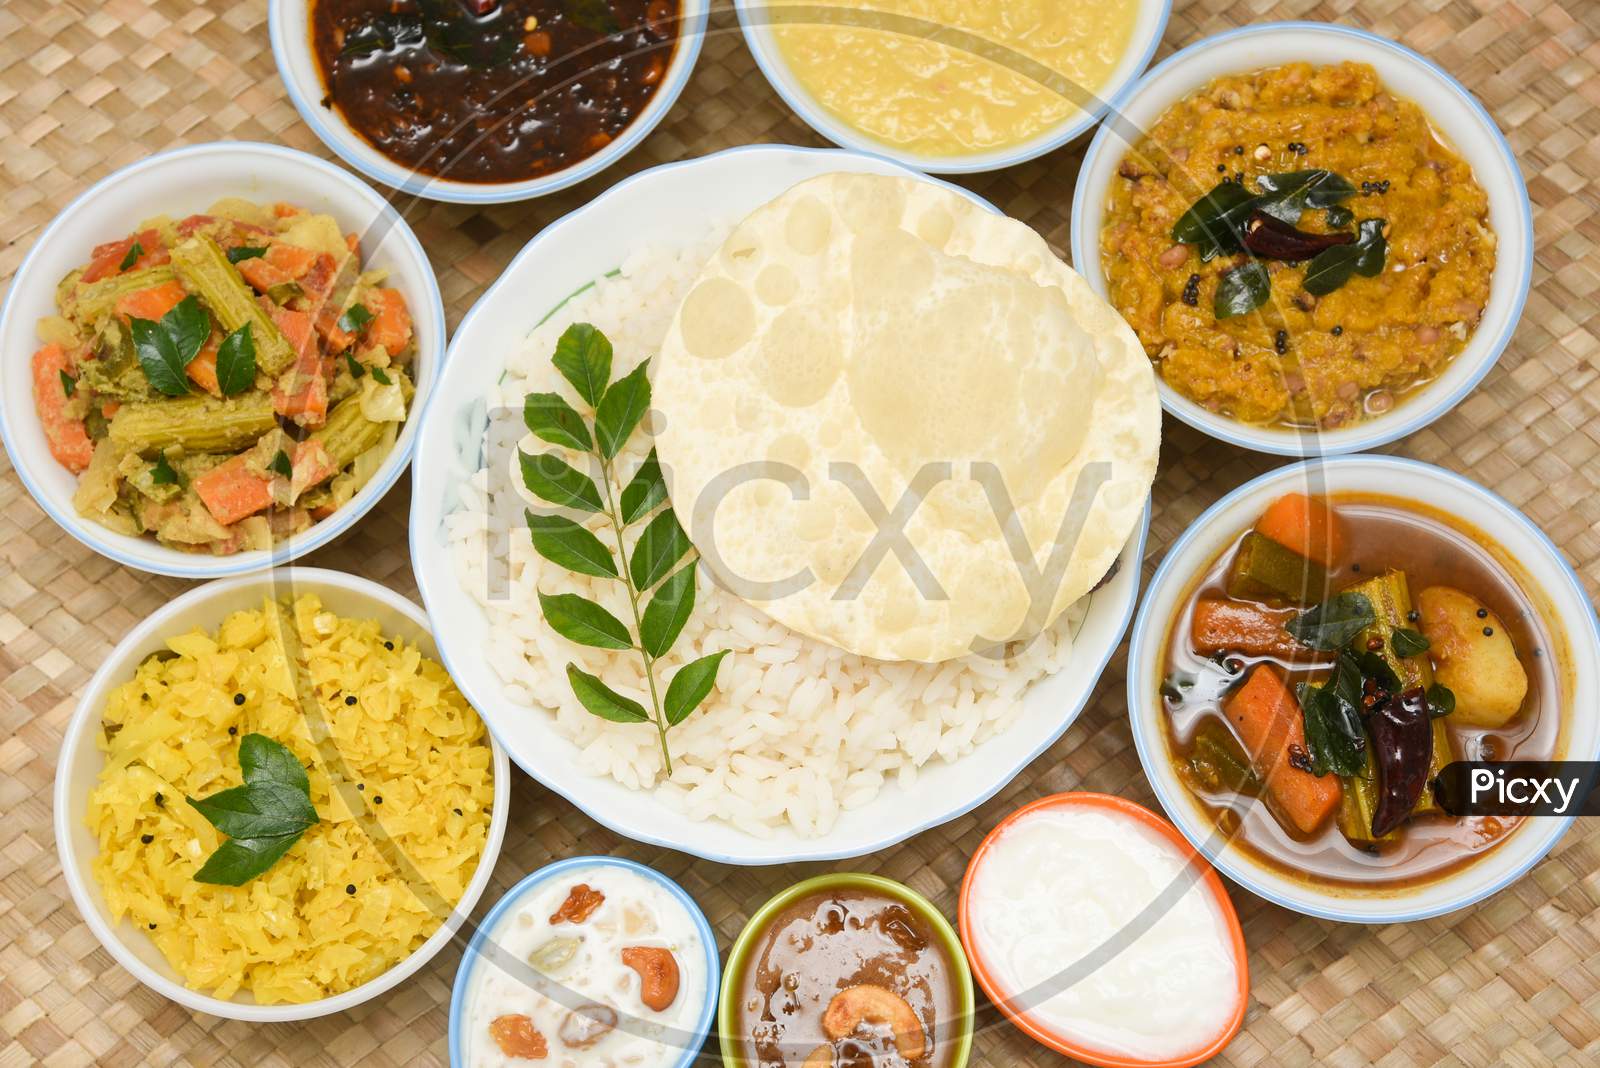 Onam Sadhya for Kerala festival, traditional Indian lunch